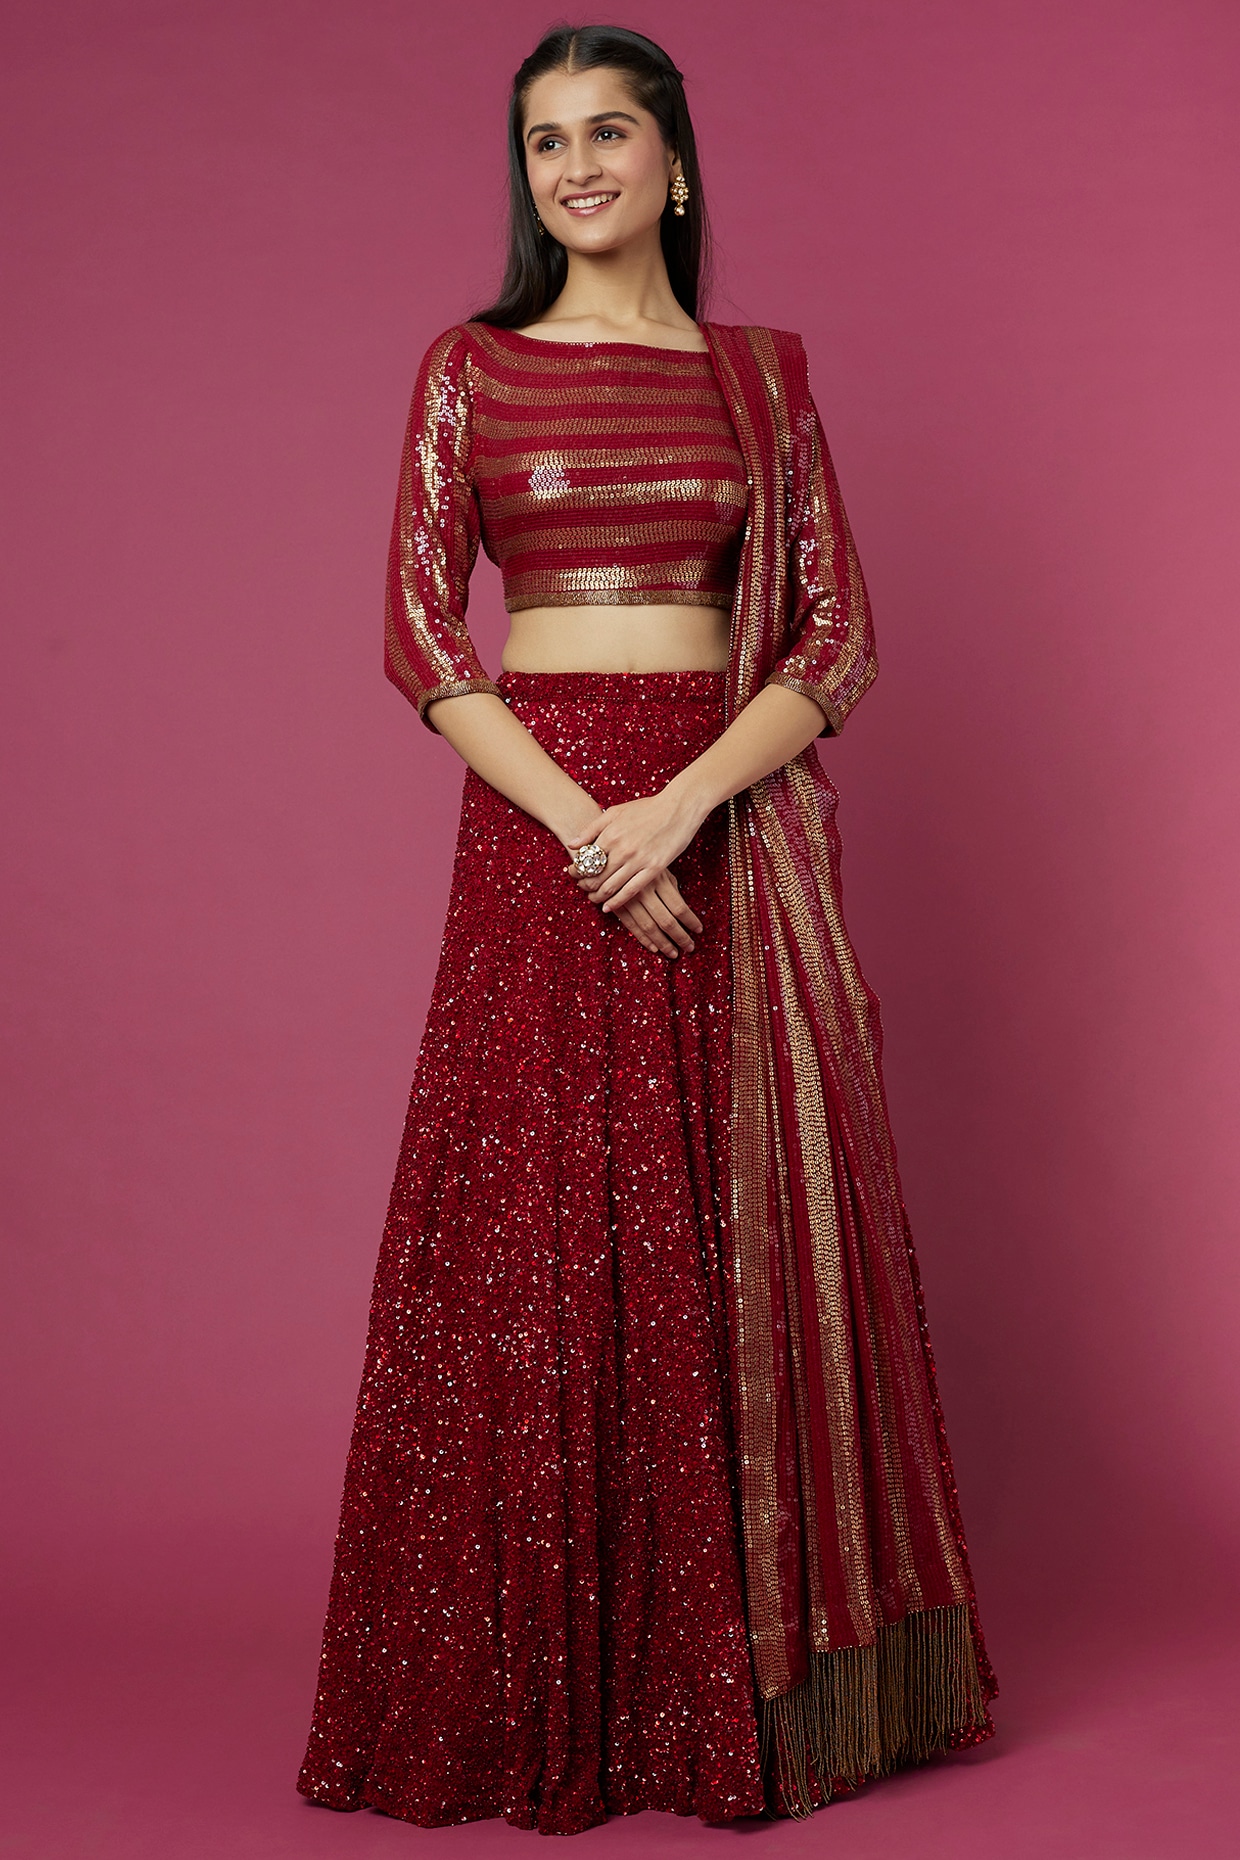 Brides That Picked Wine Coloured Lehengas For Their Wedding Soirees! |  WedMeGood